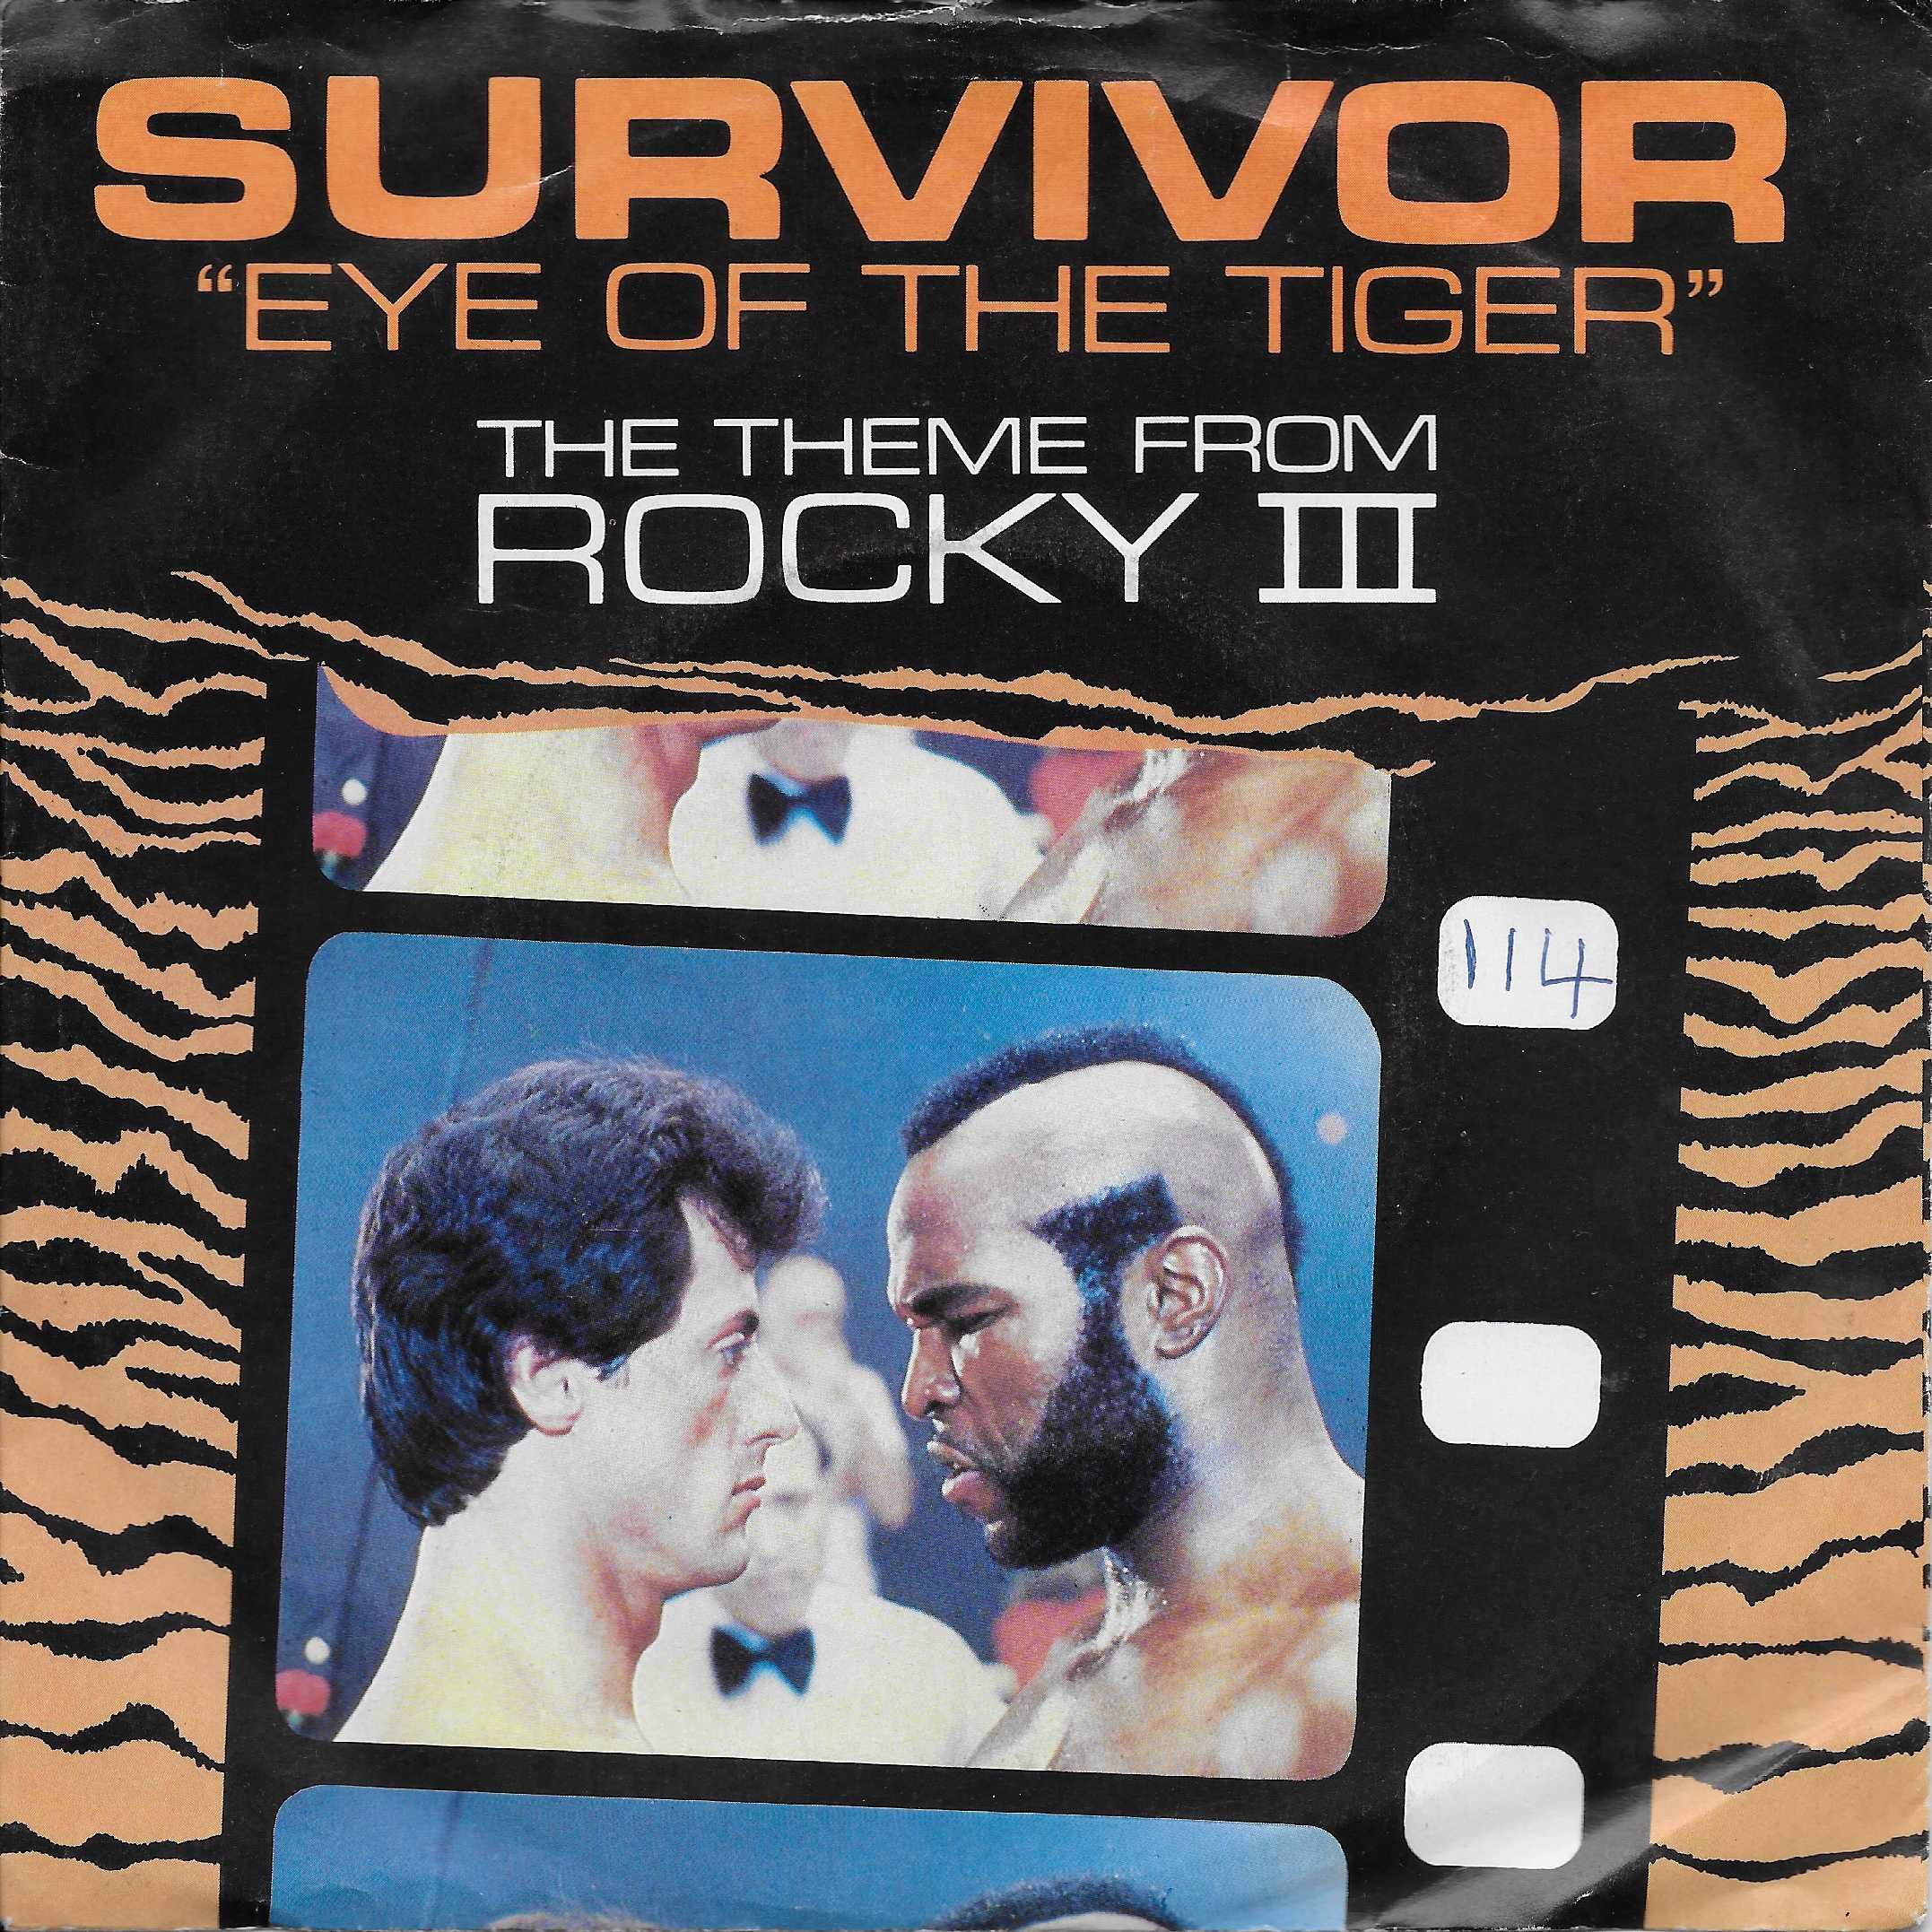 Picture of Eye of the tiger (Rocky III) by artist F Sullivan / J Peterik from ITV, Channel 4 and Channel 5 singles library